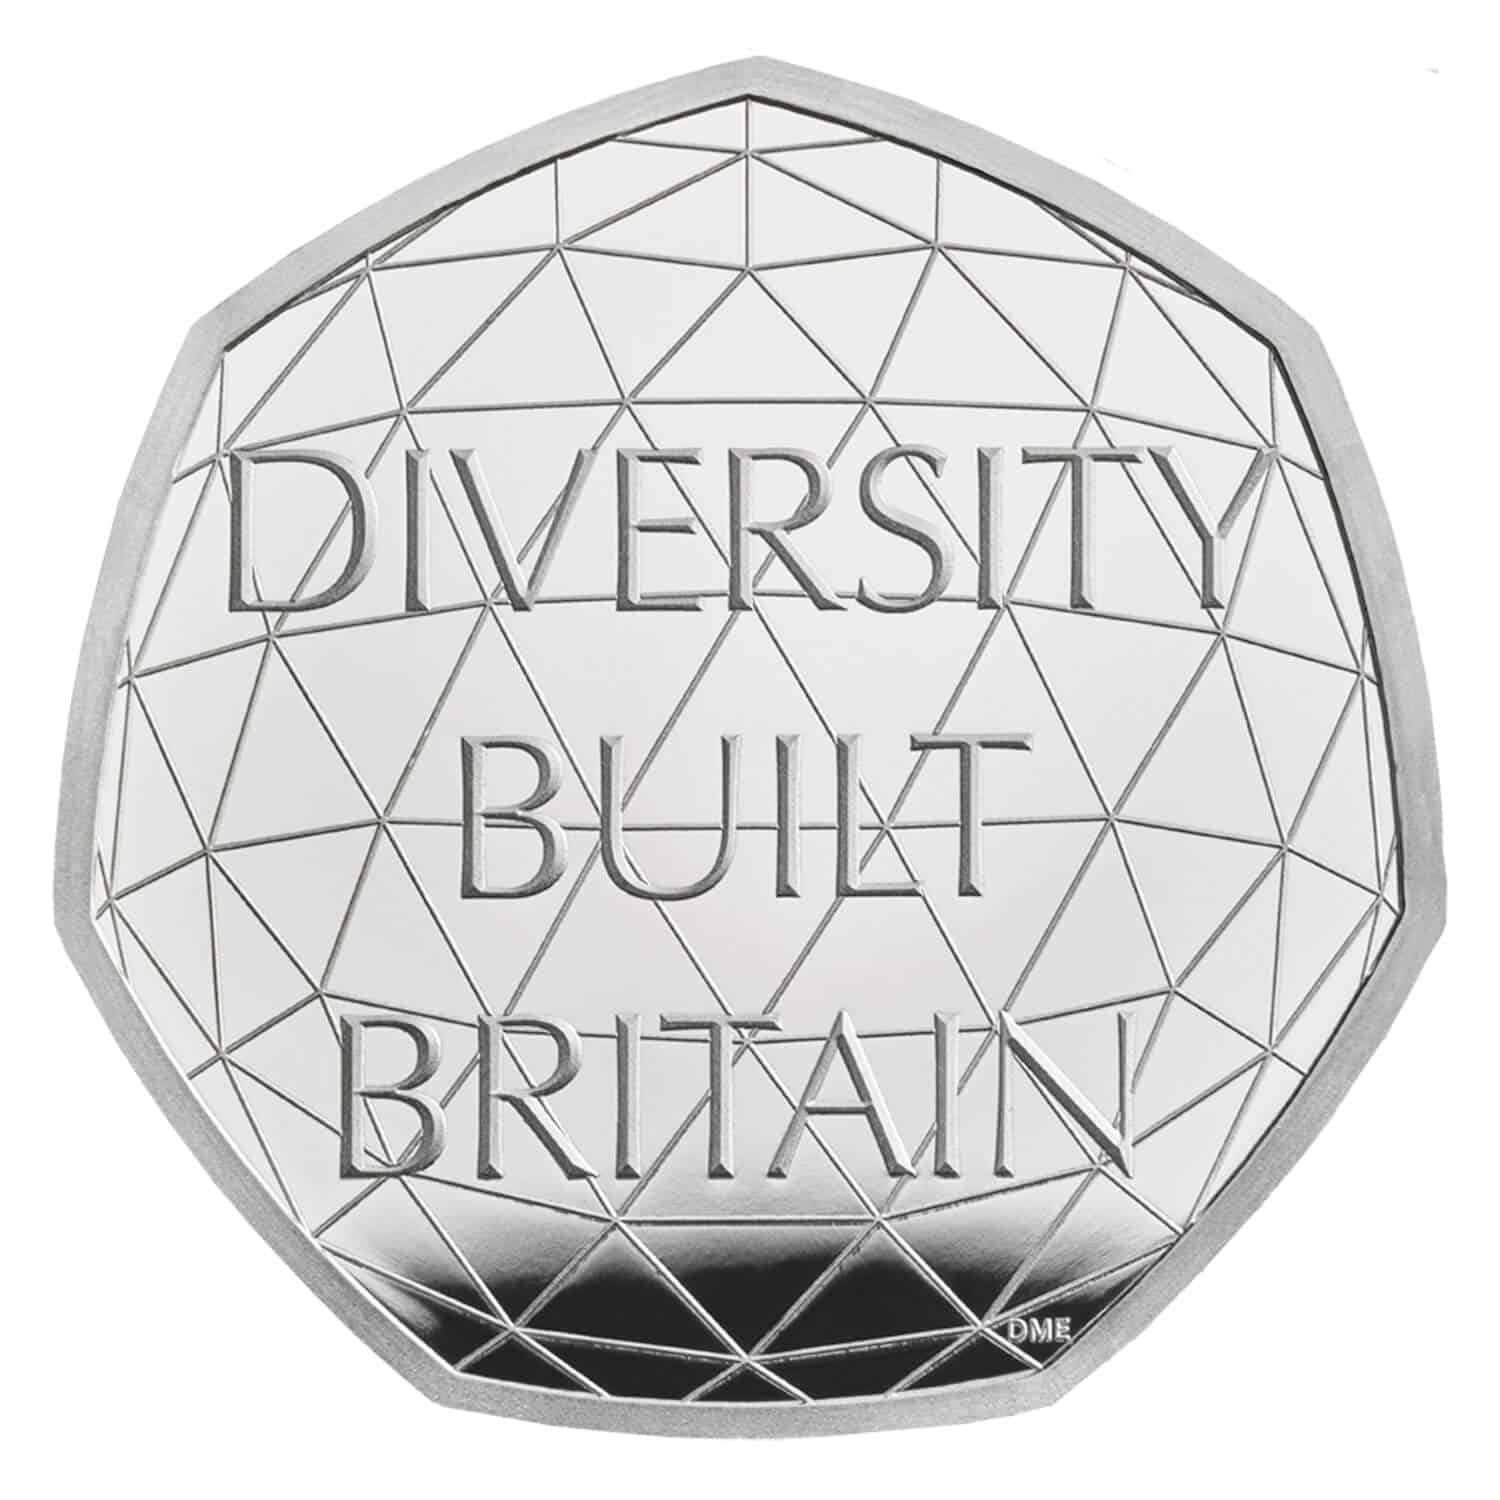 DIVERSITY BUILT BRITAIN 50pence PIECES UNCIRCULATED 20 x 50P IN MINT SEALED BAG 